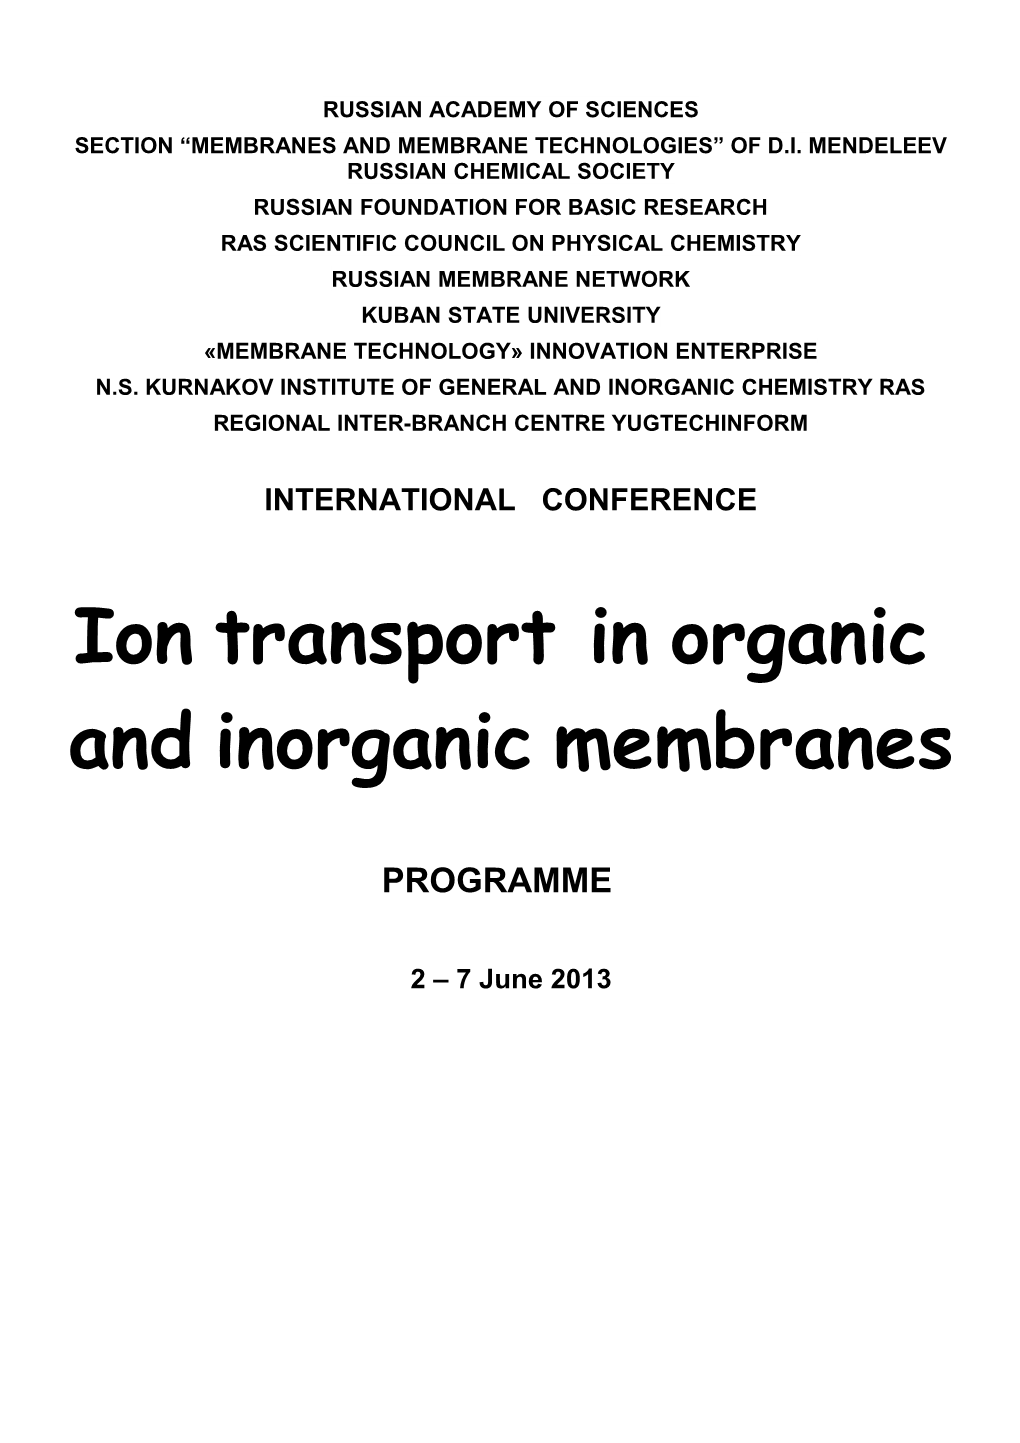 Section Membranes and Membrane Technologies of D.I. Mendeleev Russian Chemical Society